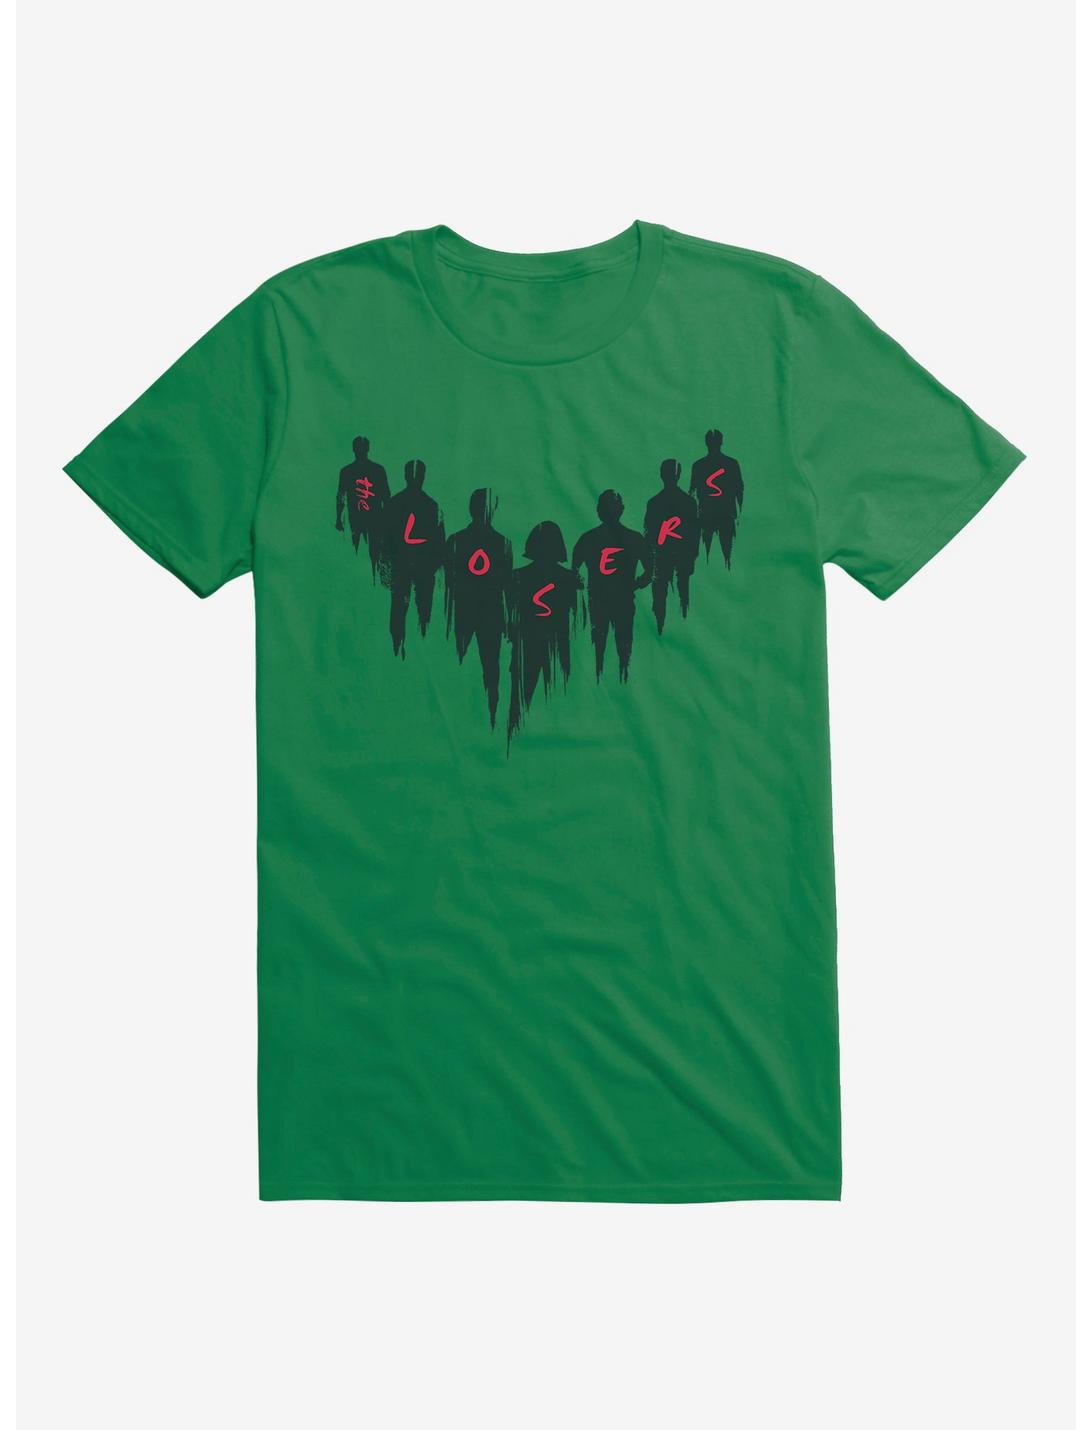 IT Chapter Two The Losers Group T-Shirt, KELLY GREEN, hi-res